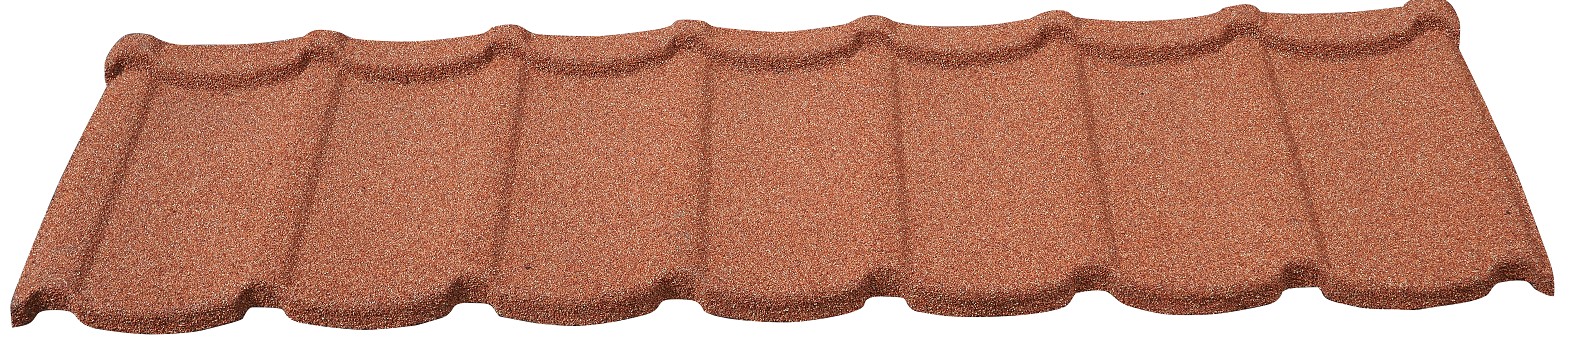 high-quality roof tiles accessories main for business for Warehouse-9